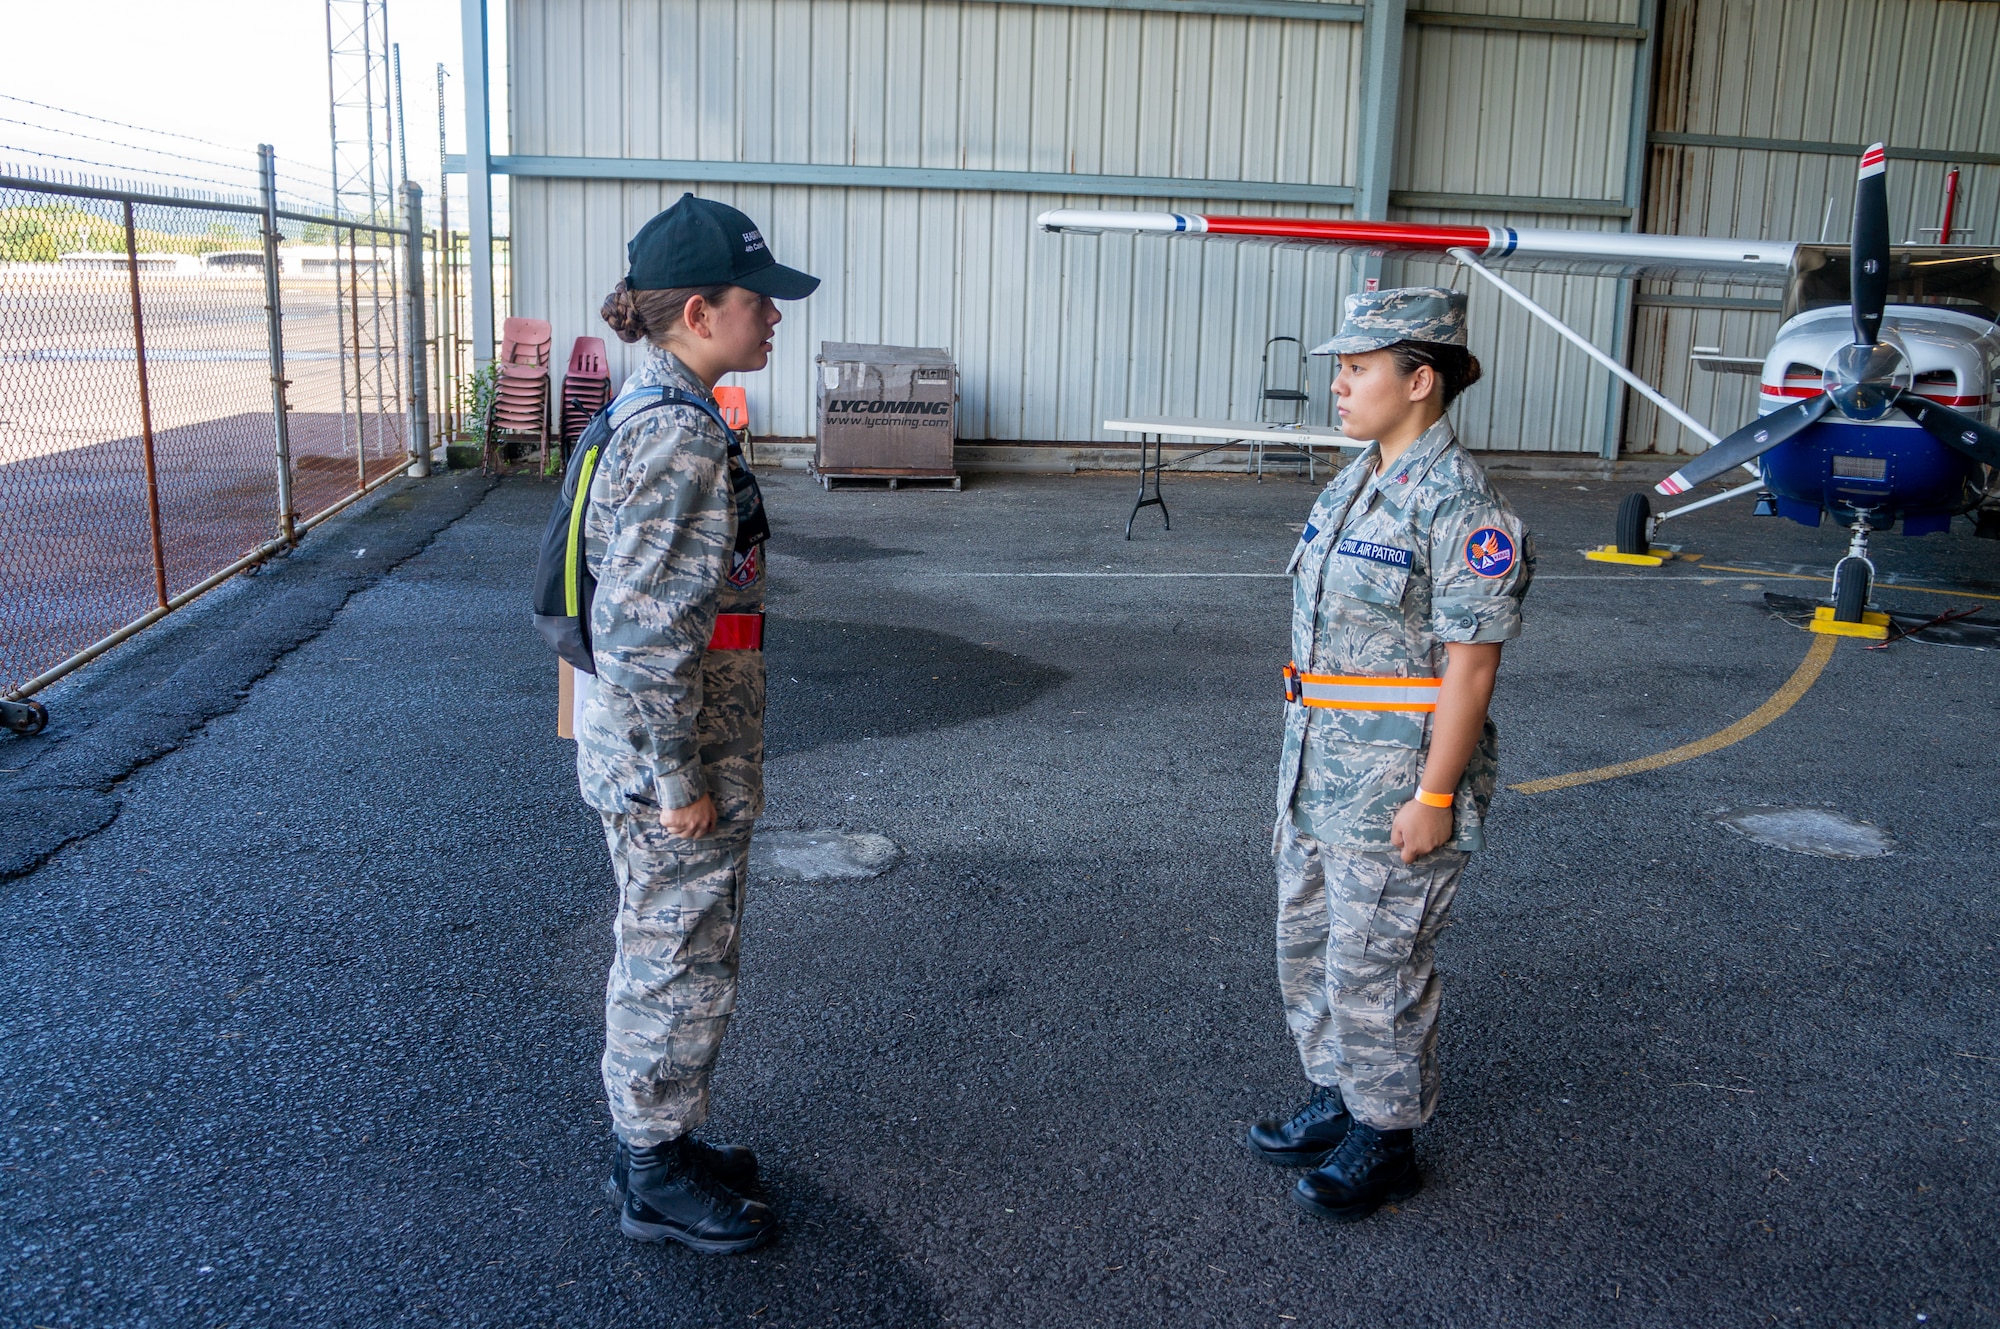 Civil Air Patrol Cadet 2nd Lt. Jessica Cogan and Cadet Tech. Sgt. Zana Kimura, CAP Lyman Field Composite Squadron, check-in students at Kilauea Military Camp, Hawaii, July 20, 2019. Cadets participated in a six-day encampment to develop leadership skills and military discipline, and learn aerospace sciences. (Courtesy Photo)